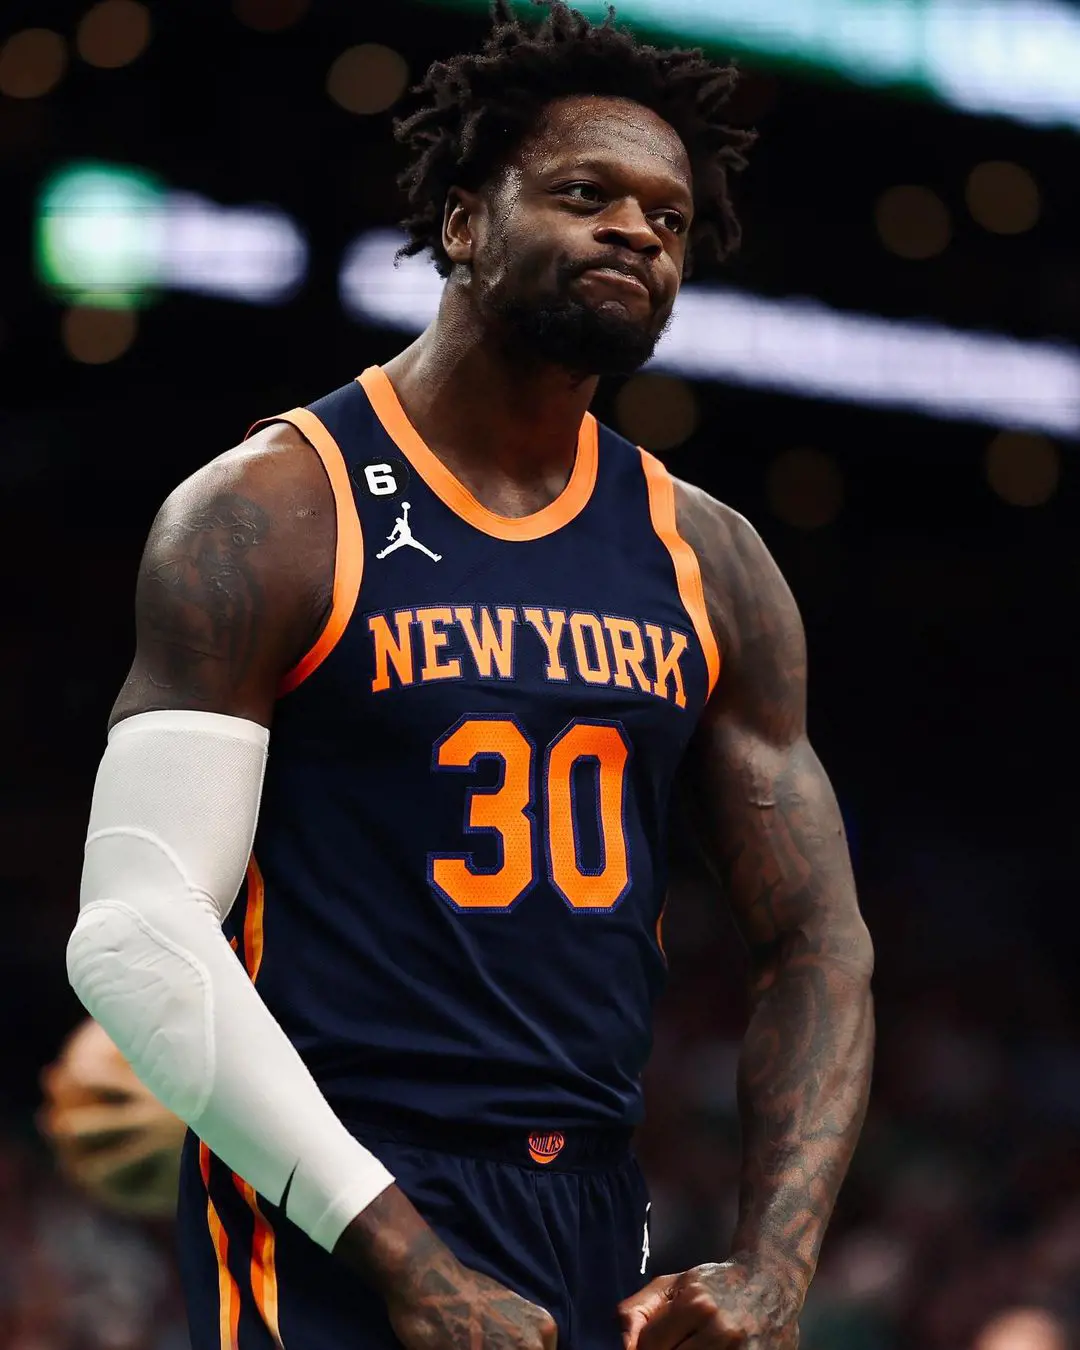 Julius Randle playing for the Knicks in 2023 season, he is seen hugging with a fan after the game